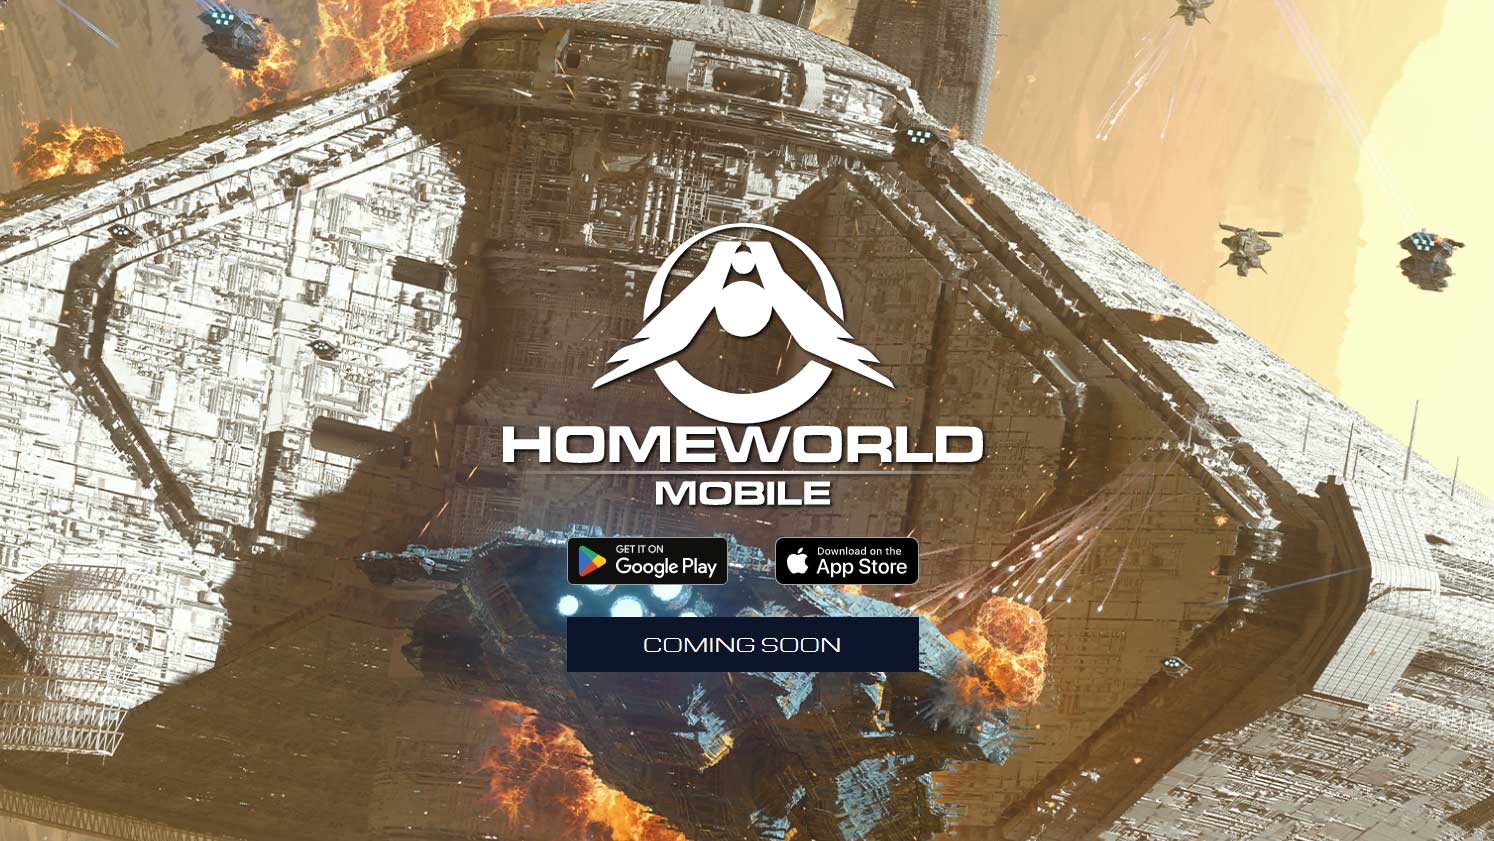 Homeworld Mobile brings real-time strategy gameplay to Android and iOS